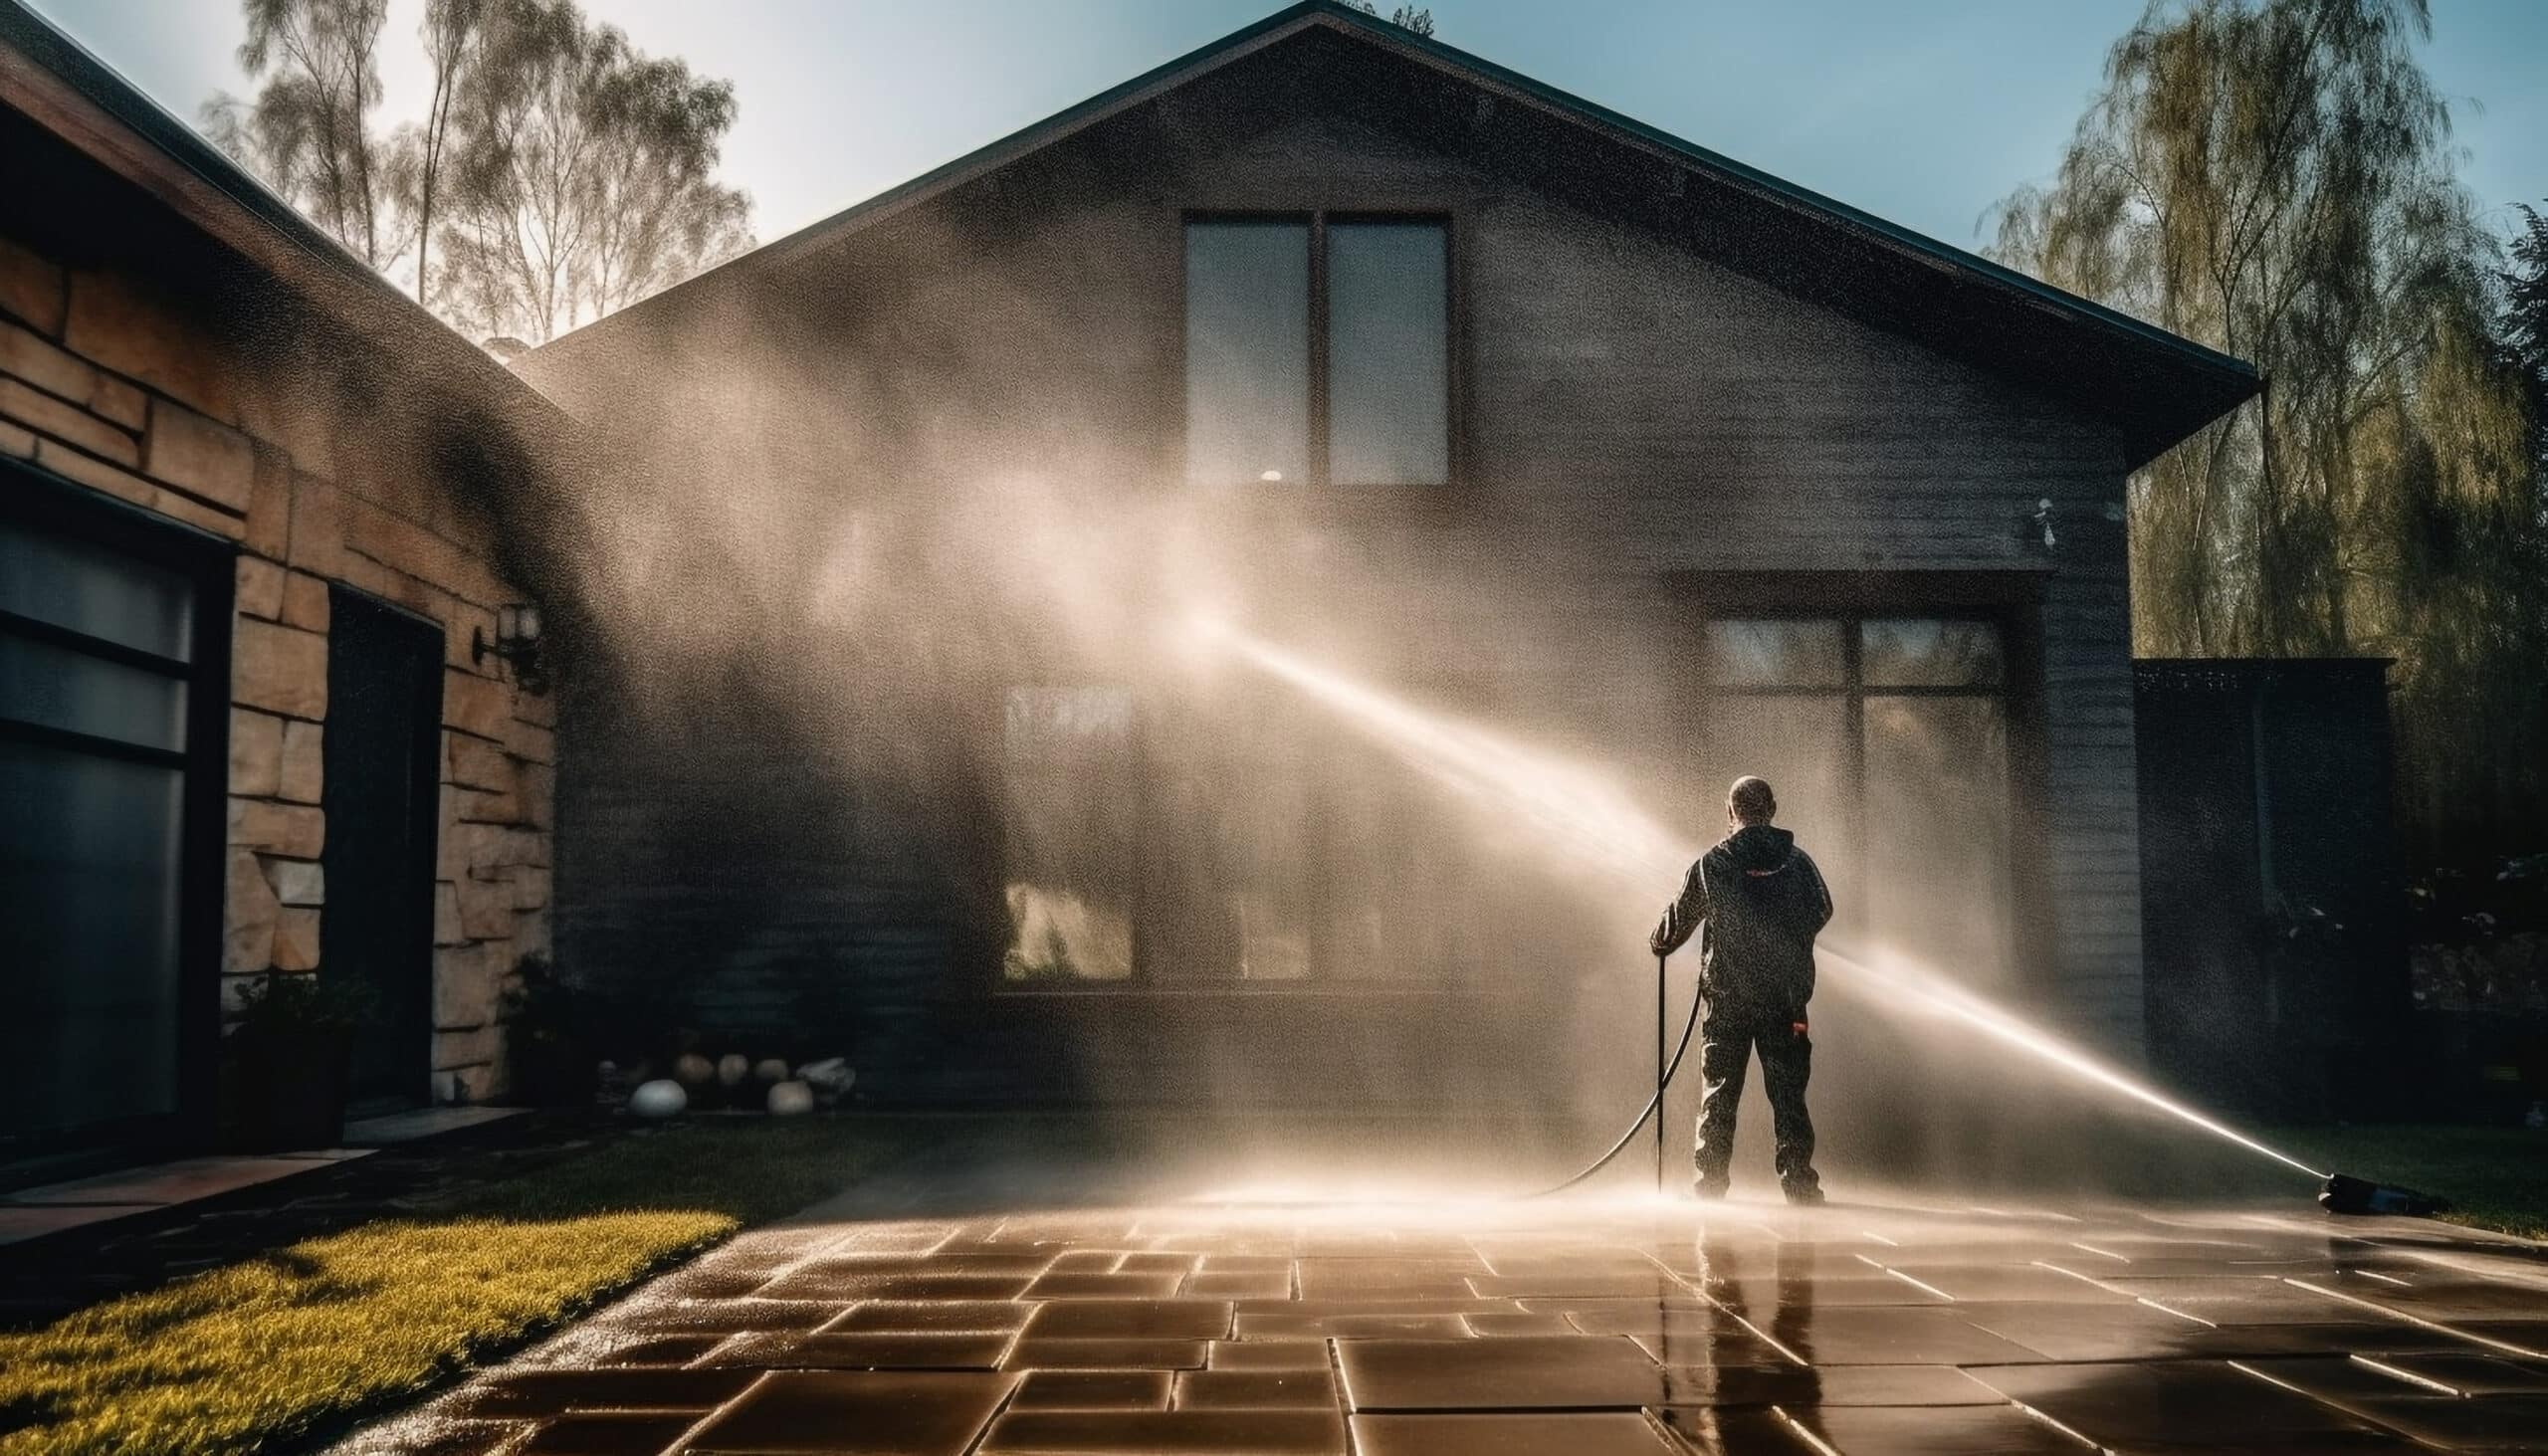 www.appr.com : Are there noise restrictions or regulations when using a gas pressure washer?